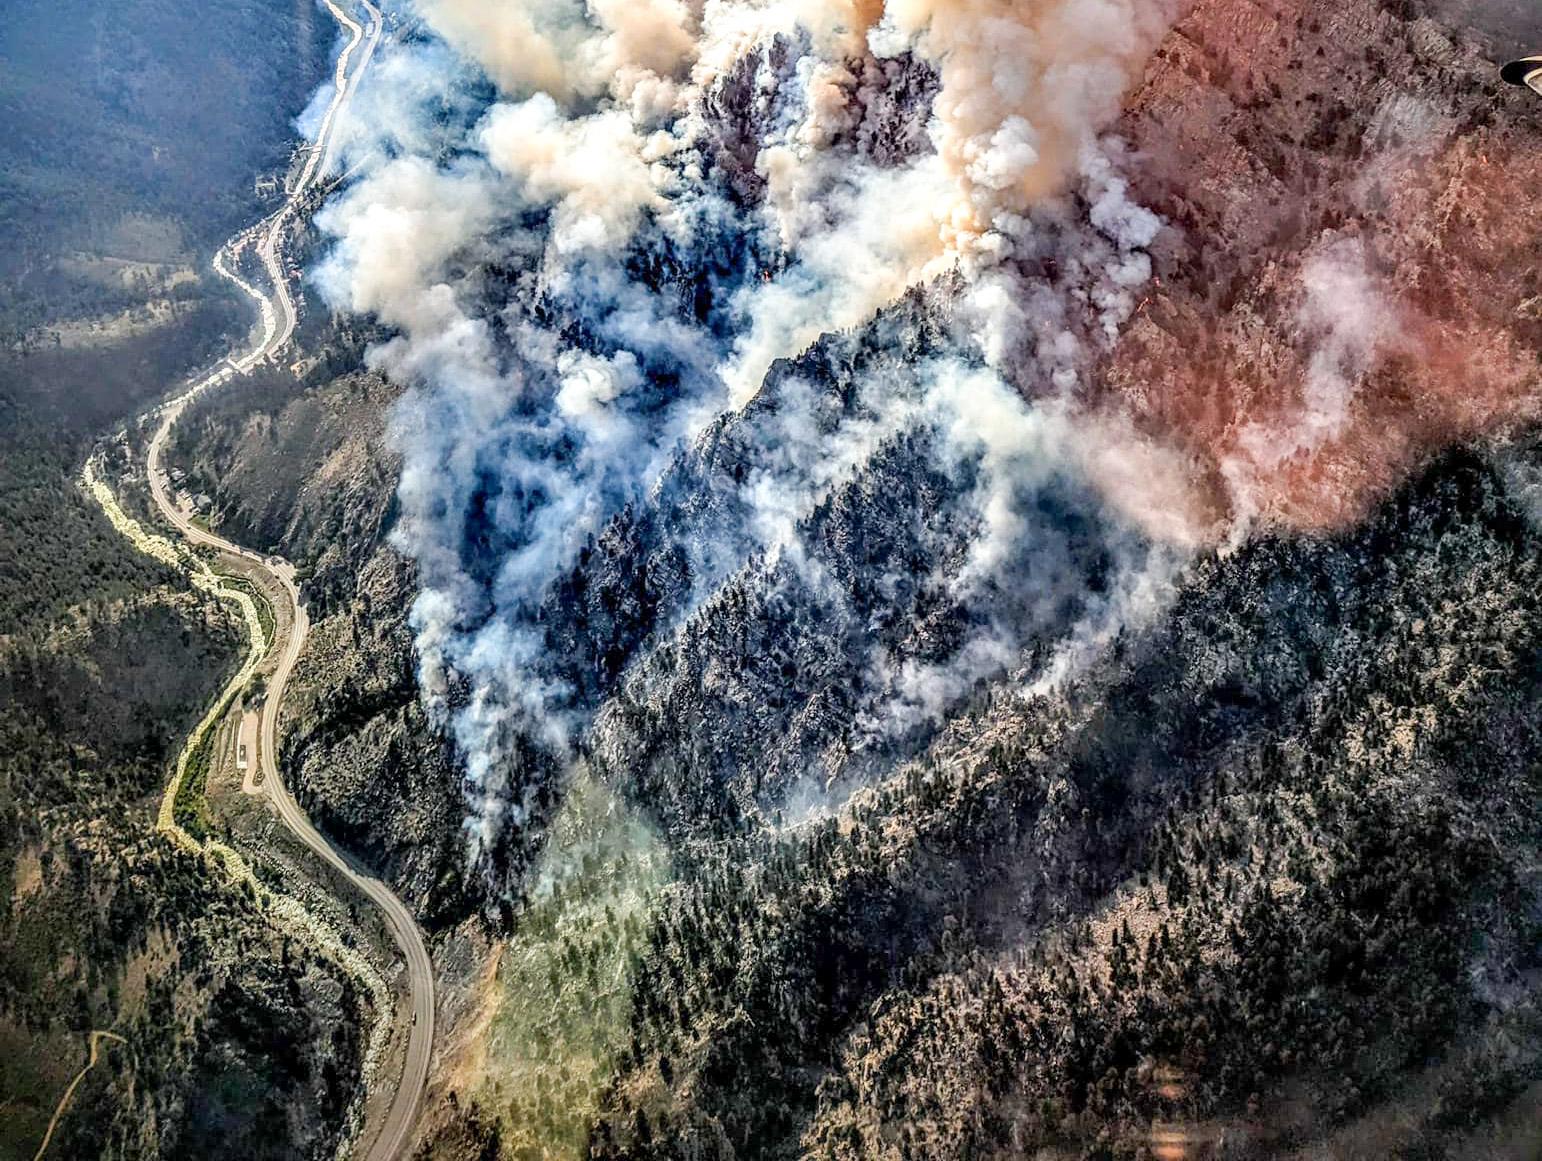 An aerial photo of a smoky wildfire covering a mountainside.